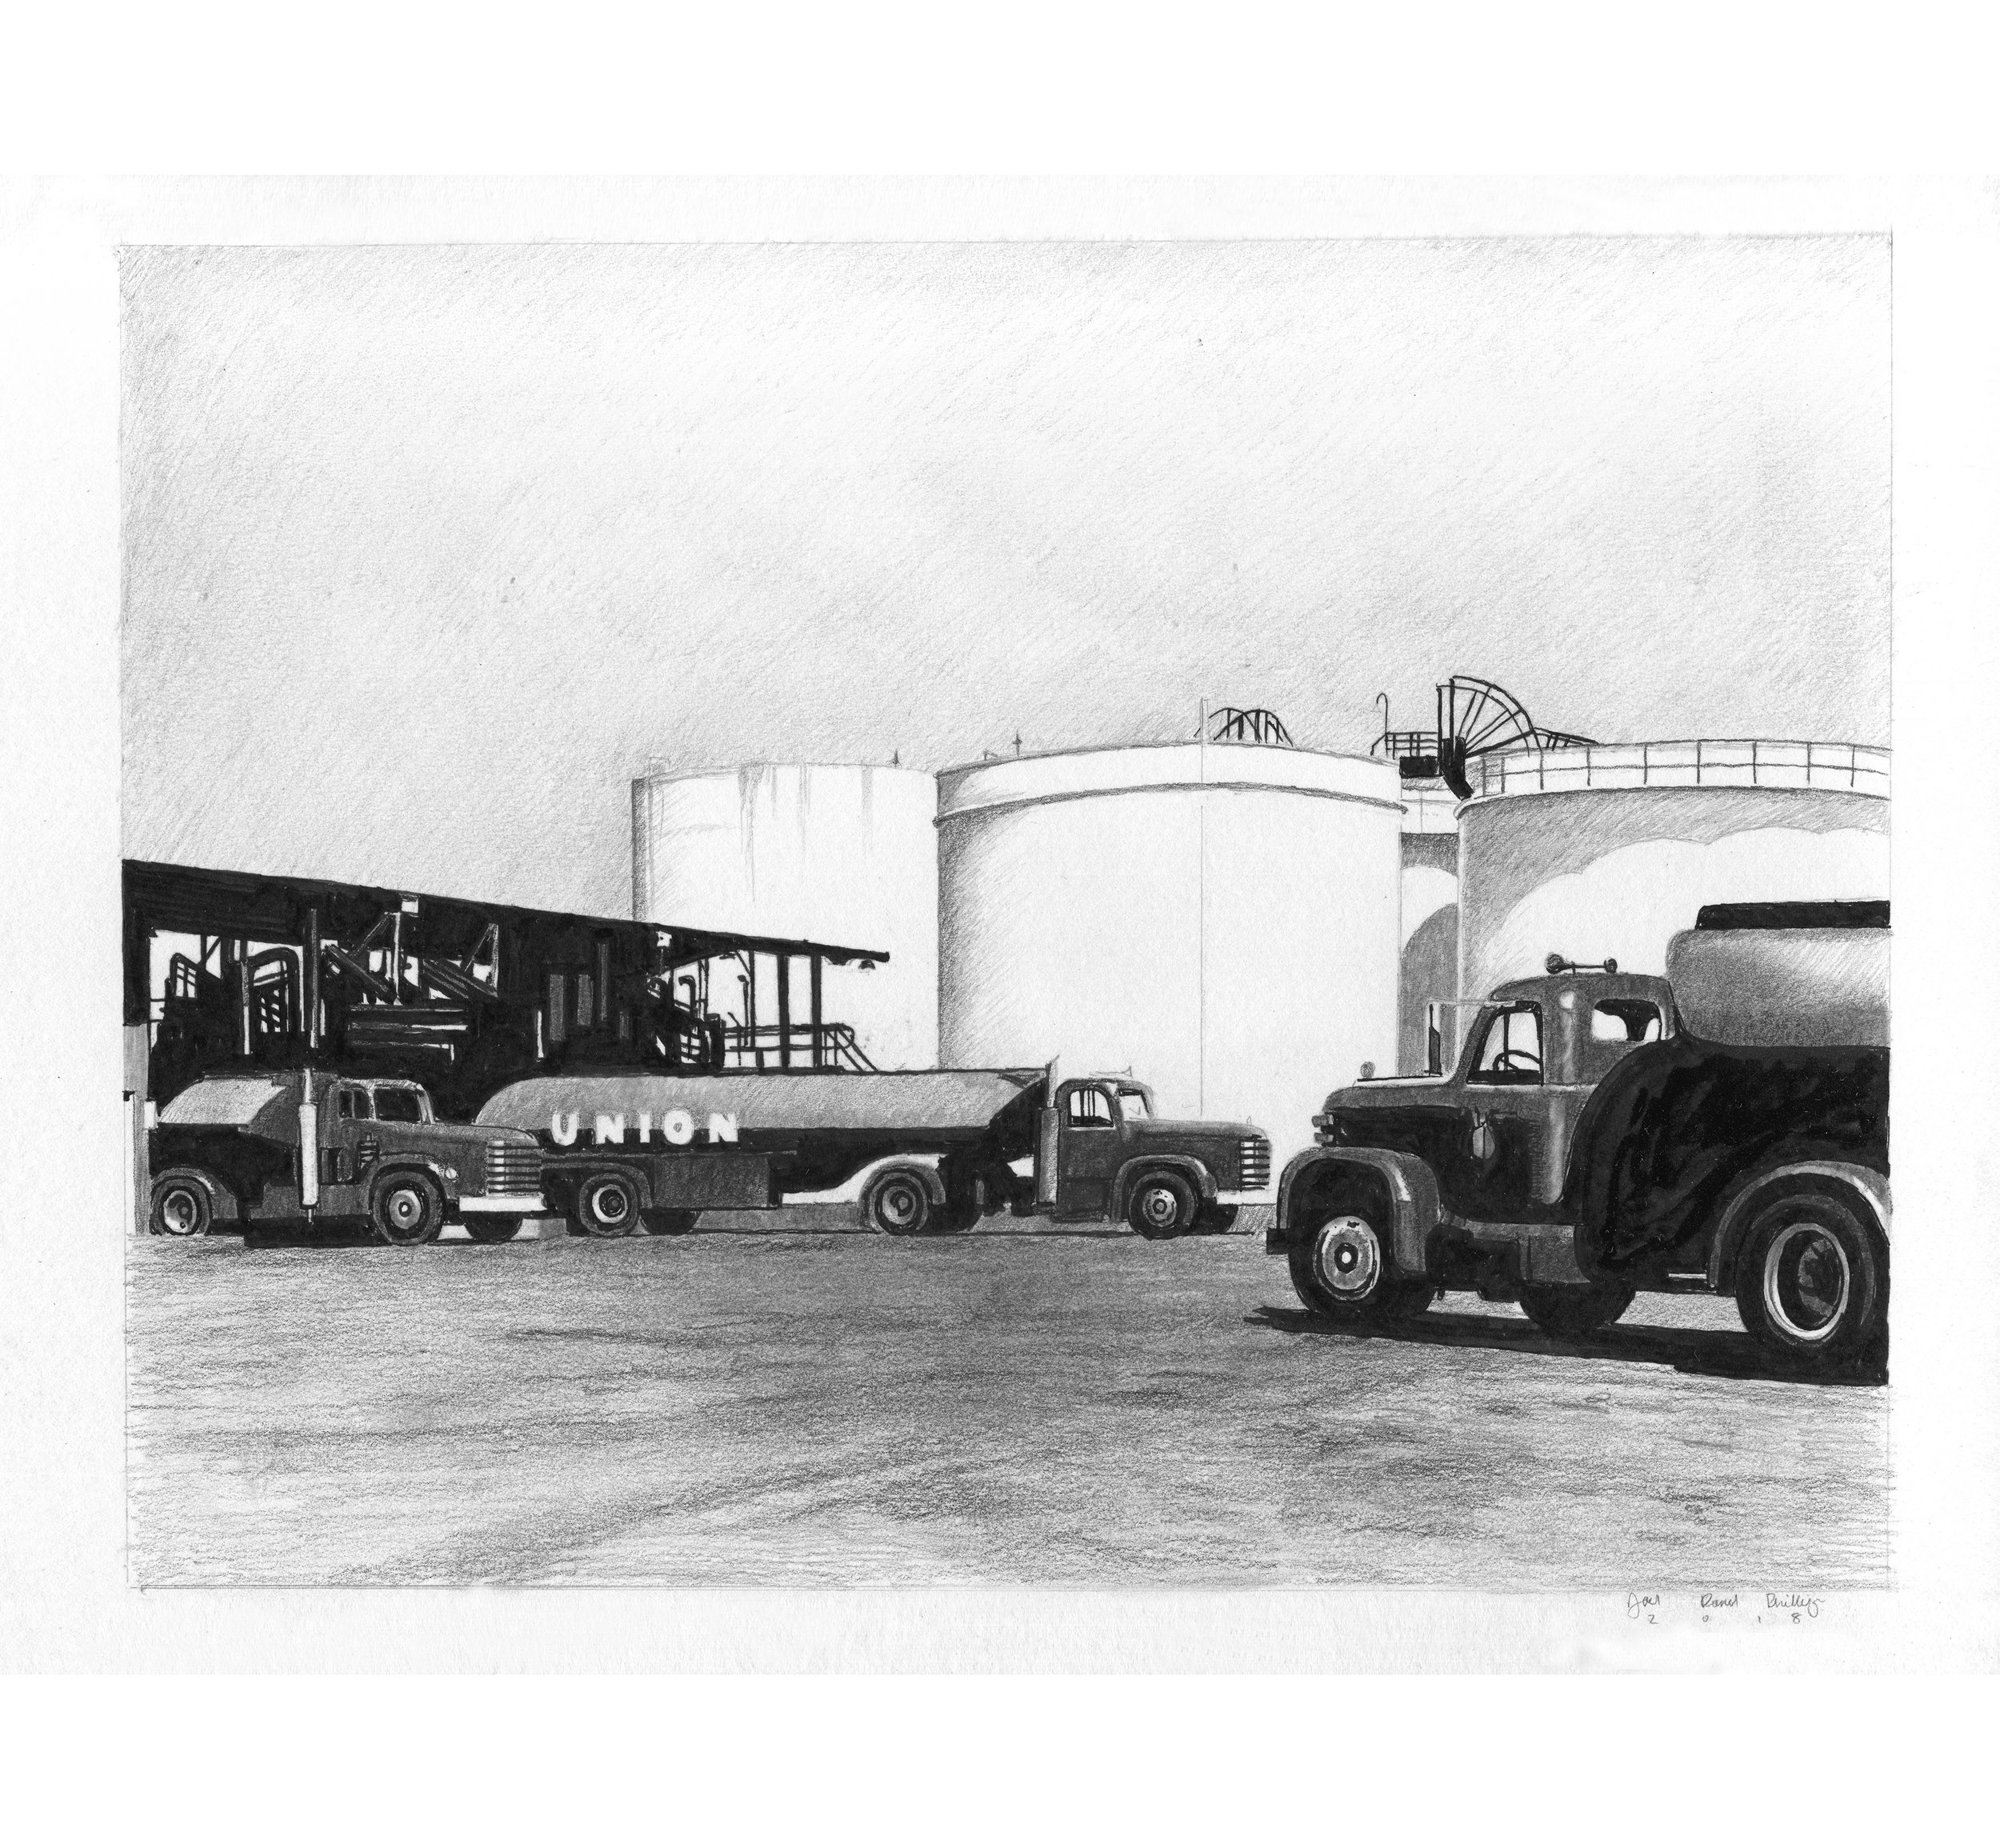 Union Oil Trucks Parked at a Refinery